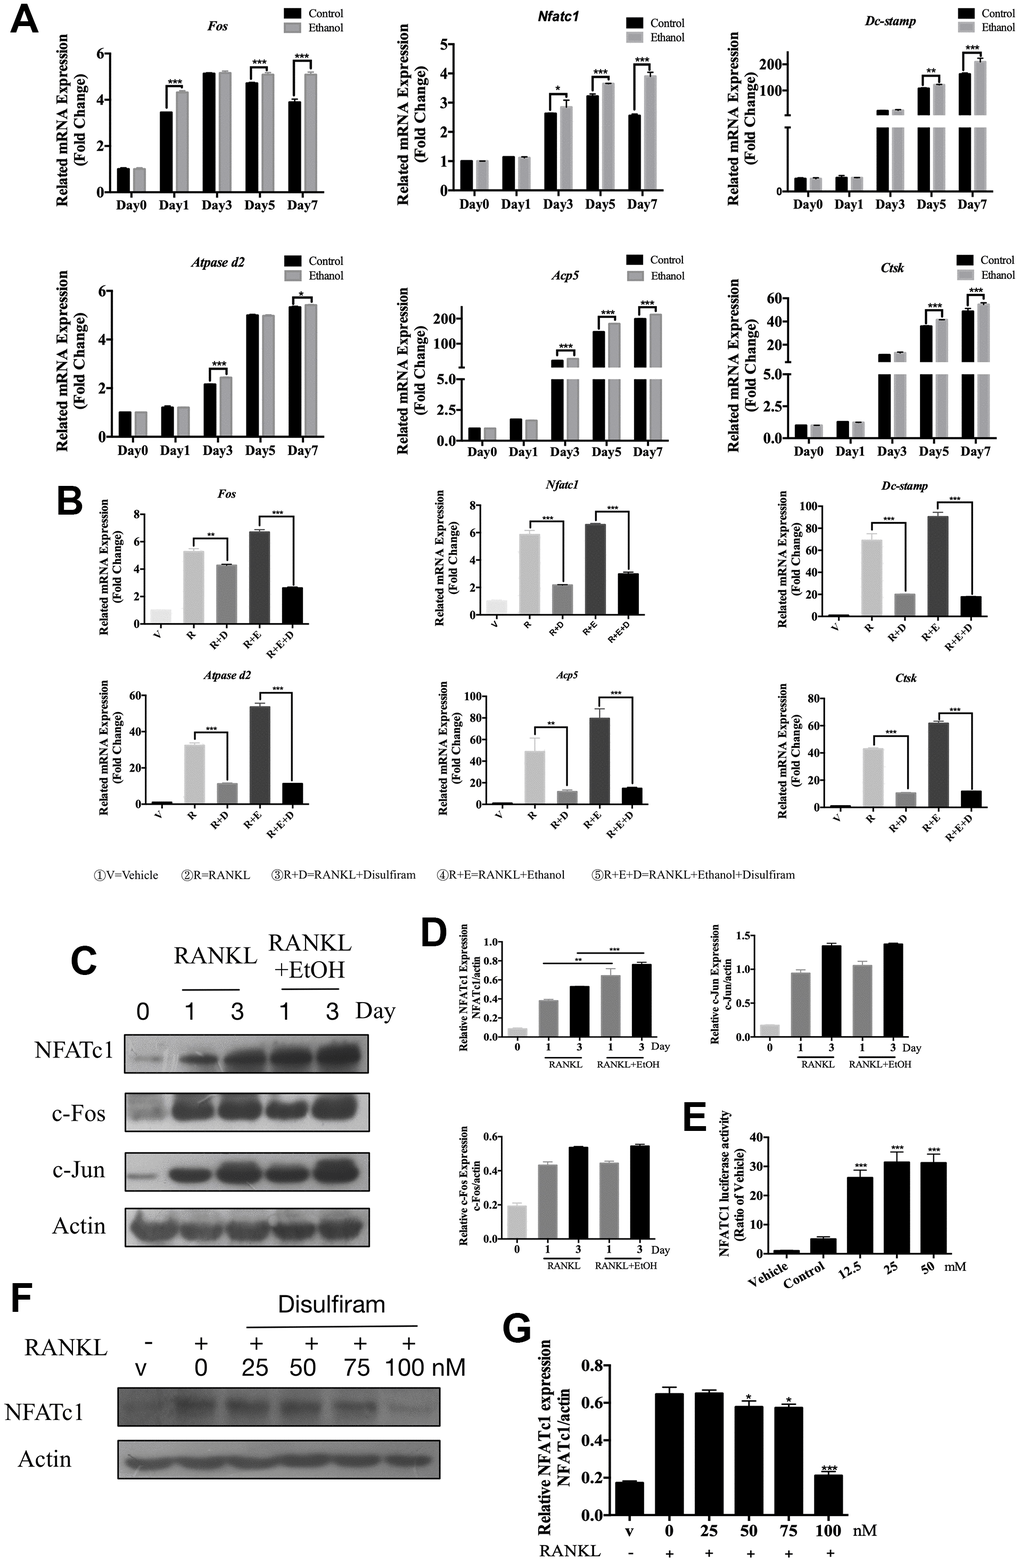 Disulfiram suppressed osteoclast-related genes expression and down-regulated the expression of NFATc1. (A) qPCR was used to measure relative expression levels, normalized to that of β-actin, of RANKL-induced OC-related genes at different times of treatment with 50 mM ethanol (n = 3). (B) qPCR was used to measure relative expression levels, normalized to that of β-actin, BMMs were treated with indicated conditions indicated below figure 2B for 3 days (n = 3). (C) Ethanol increased the RANKL-induced NFATc1 protein expression but did not affect c-Fos and c-Jun. Total cellular proteins were extracted from BMM-derived OCs co-treated with RANKL and 50 mM ethanol for 0, 1, and 3 days. (D) Relative expression of c-Fos, c-Jun, and NFATc1 was determined by densitometric analysis of each band and expressed as a ratio to that of β-actin using ImageJ. (E) Ethanol stimulated NFATc1 transcriptional activity. RAW 264.7 cells stably expressing the NFATc1-TA-Luc luciferase reporter were pretreated with 50 mM ethanol for 1 h and then stimulated for 6 h with RANKL, after which luciferase activity was measured. Results are expressed as fold-changes compared to the levels in unstimulated controls (n = 3). (F) Disulfiram inhibited the expression of NFATc1 in a dose-dependent manner. (G) Relative expression of NFATc1 was determined by densitometric analysis of each band and expressed as a ratio to that of β-actin using ImageJ software. Bar graphs are presented as the mean ± SD. *p p p 